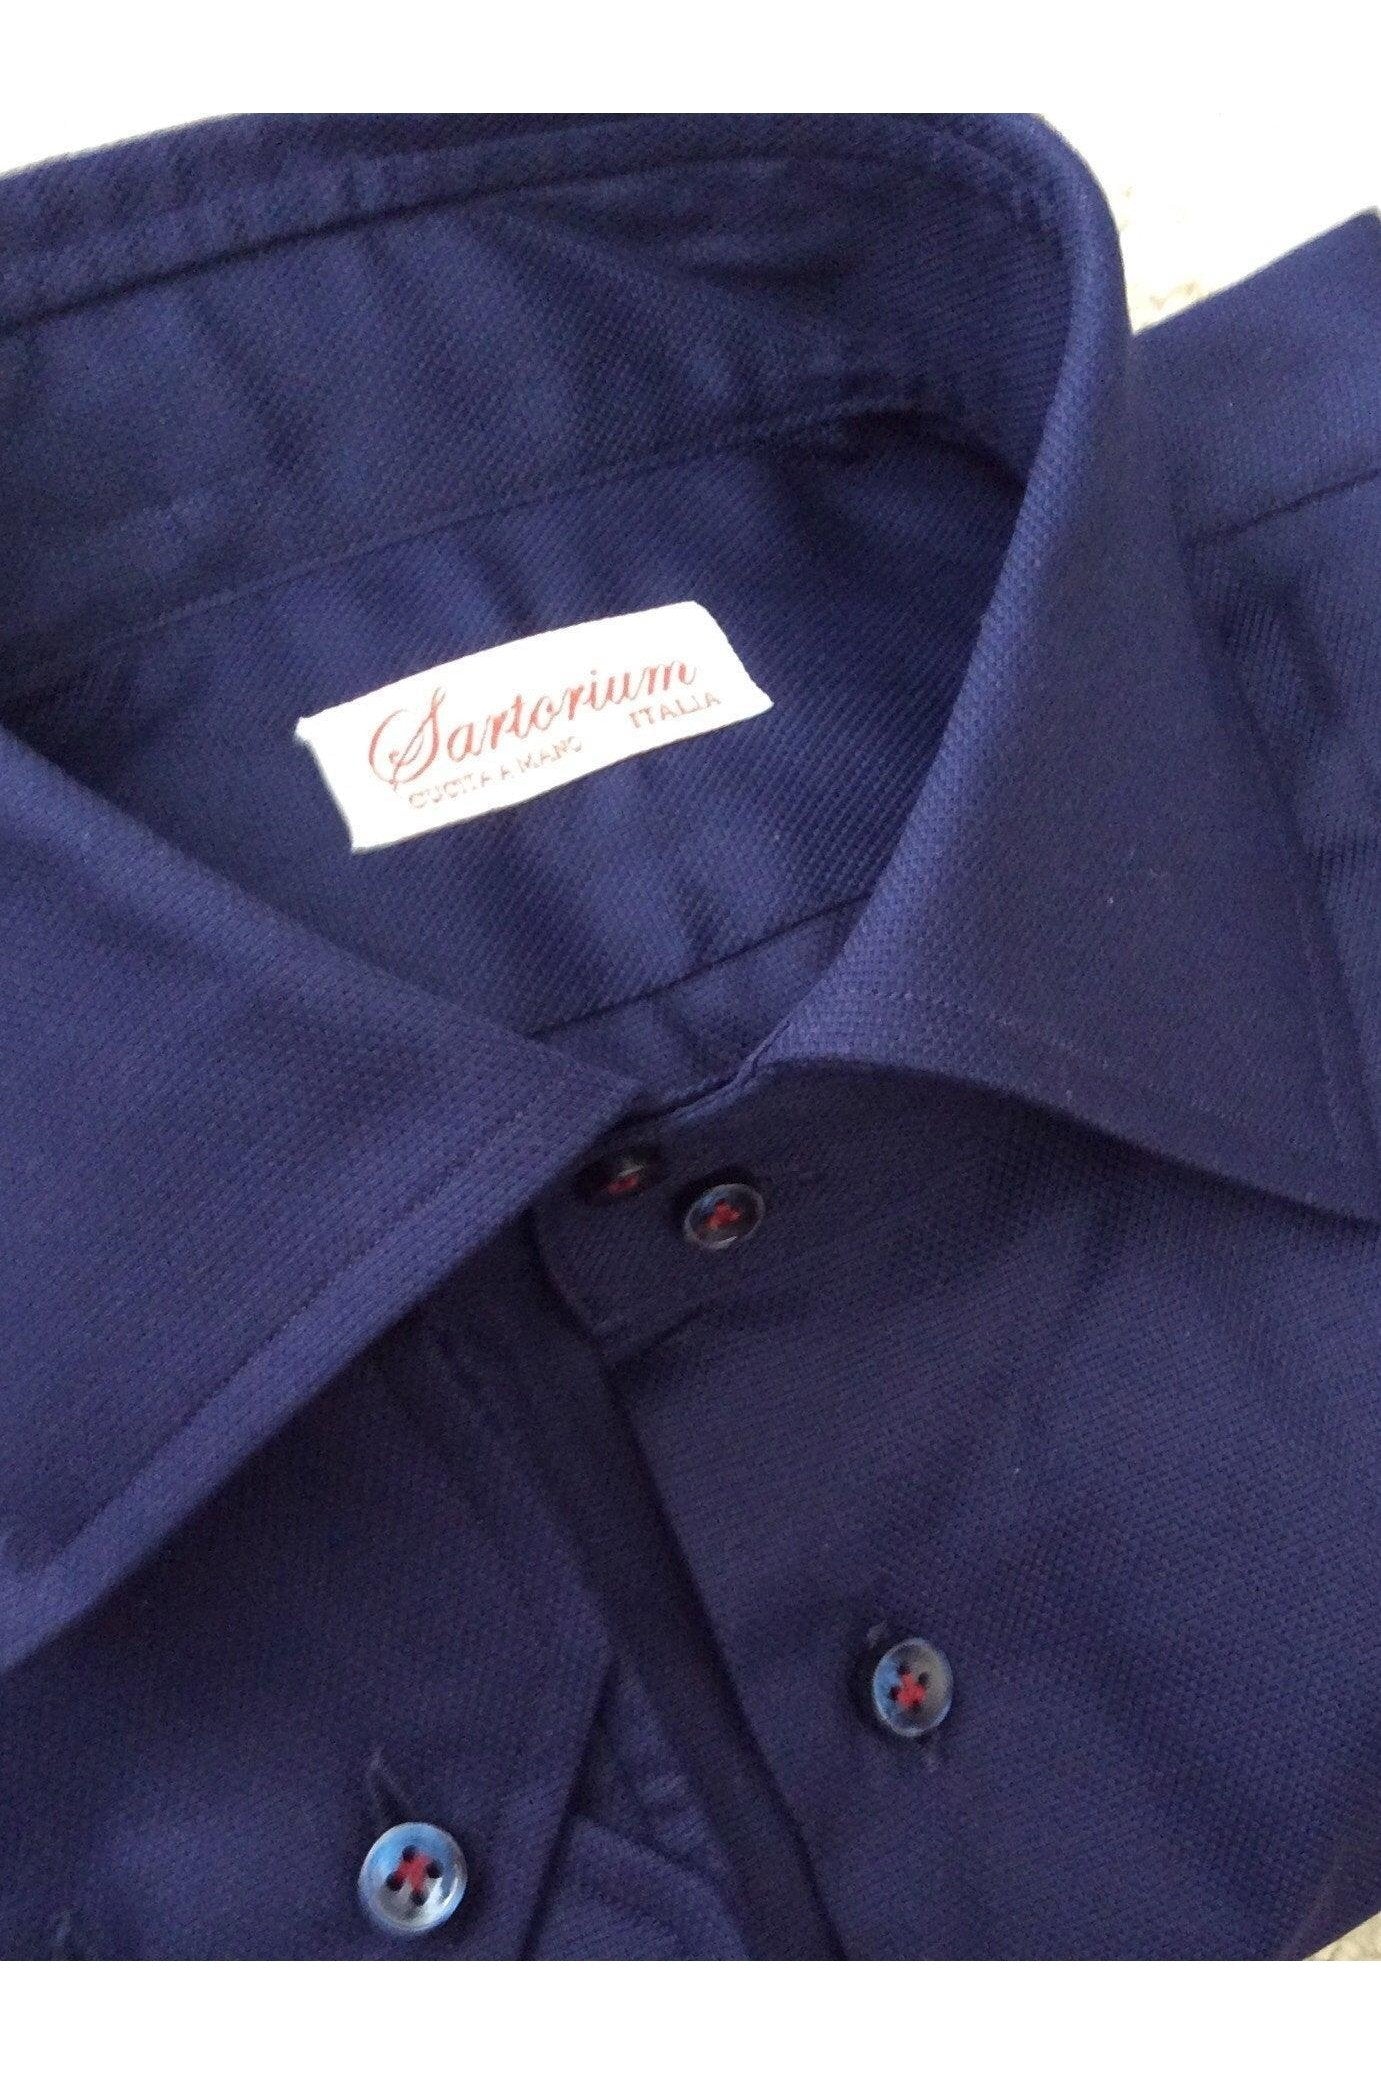 Man Cotton Shirt ( Made to measure order only) - Sartorium Lux